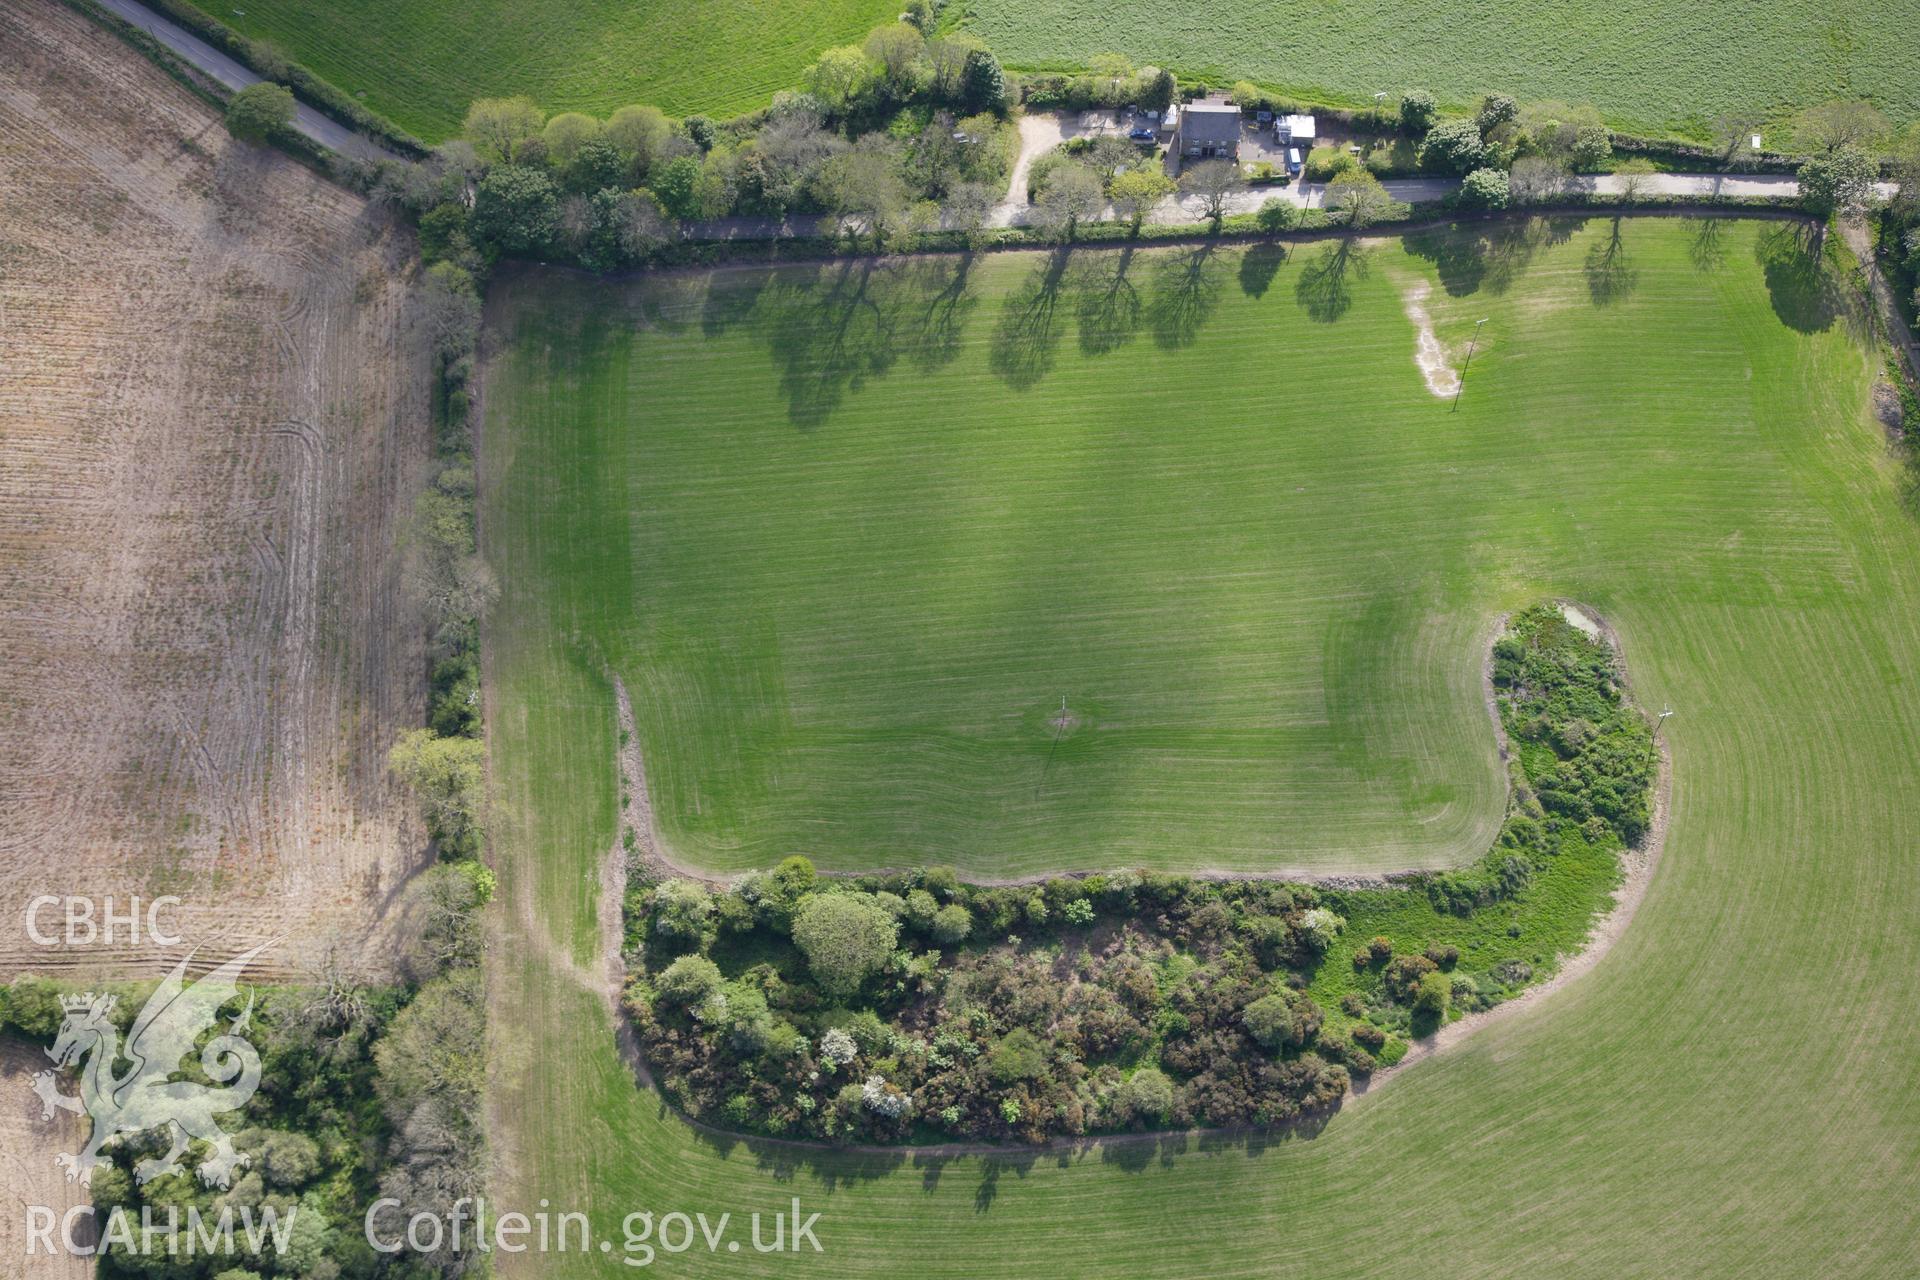 RCAHMW colour oblique photograph of Wiston Roman fort. Taken by Toby Driver on 22/05/2012.